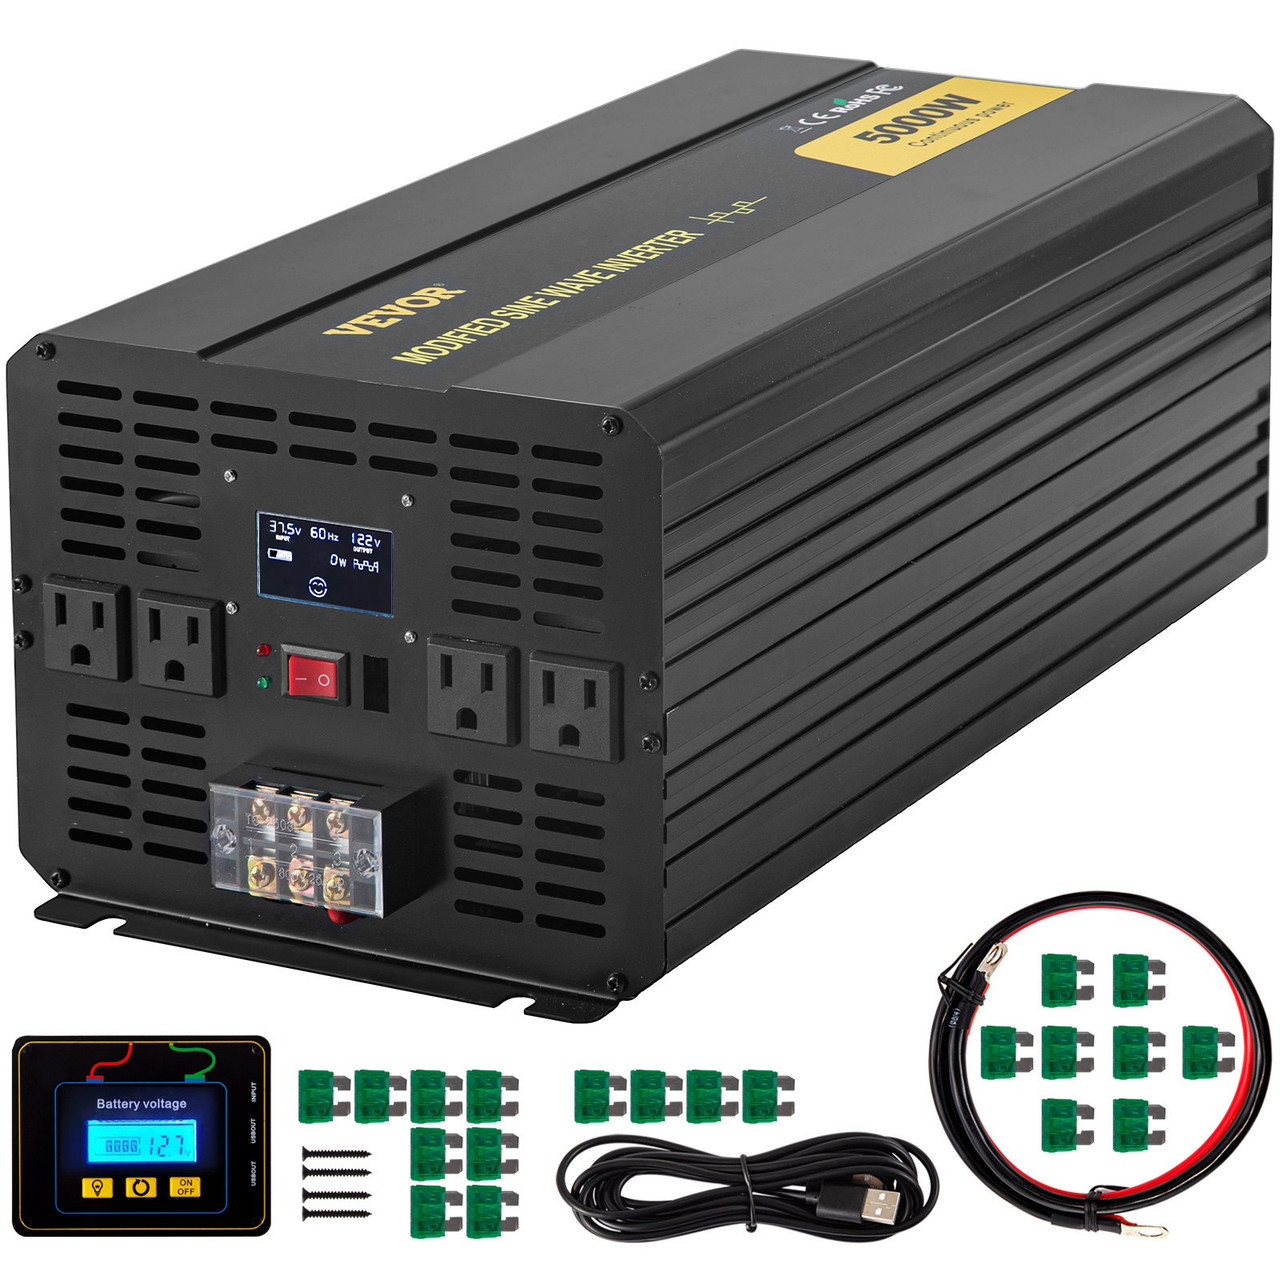 Power Inverter, 5000W Modified Sine Wave Inverter, DC 36V to AC 120V Car Converter, with LCD Display, Remote Controller, LED Indicator, AC Outlets Inverter for Truck RV Car Boat Travel Camping